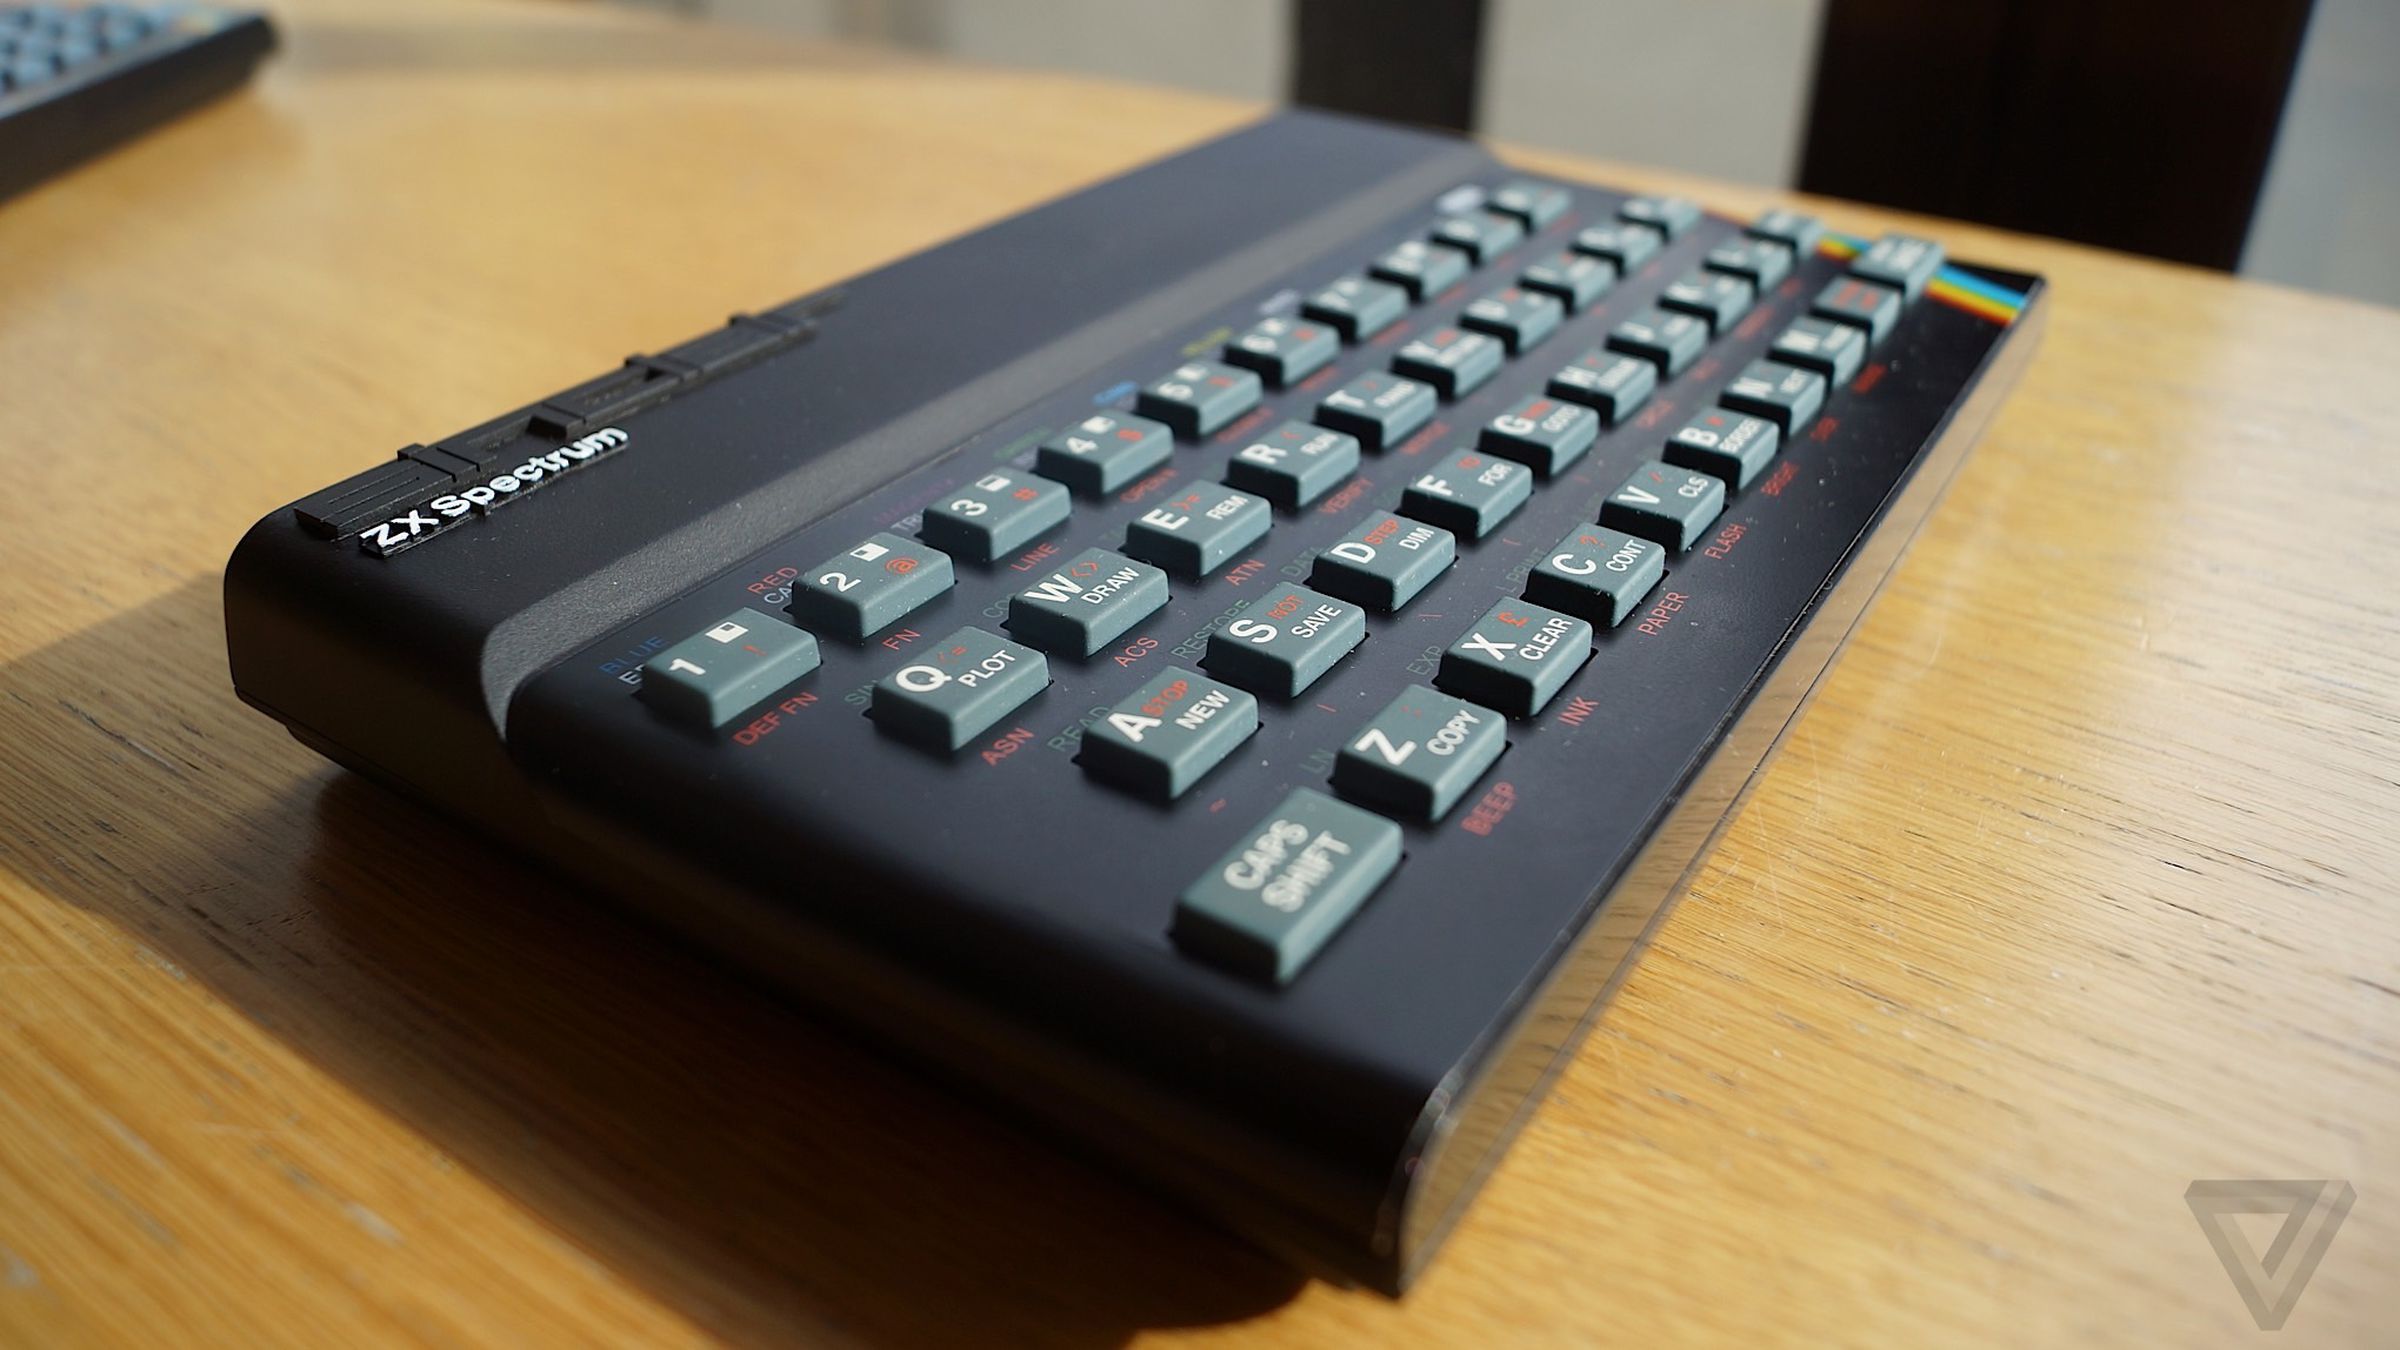 The ZX Spectrum lives again